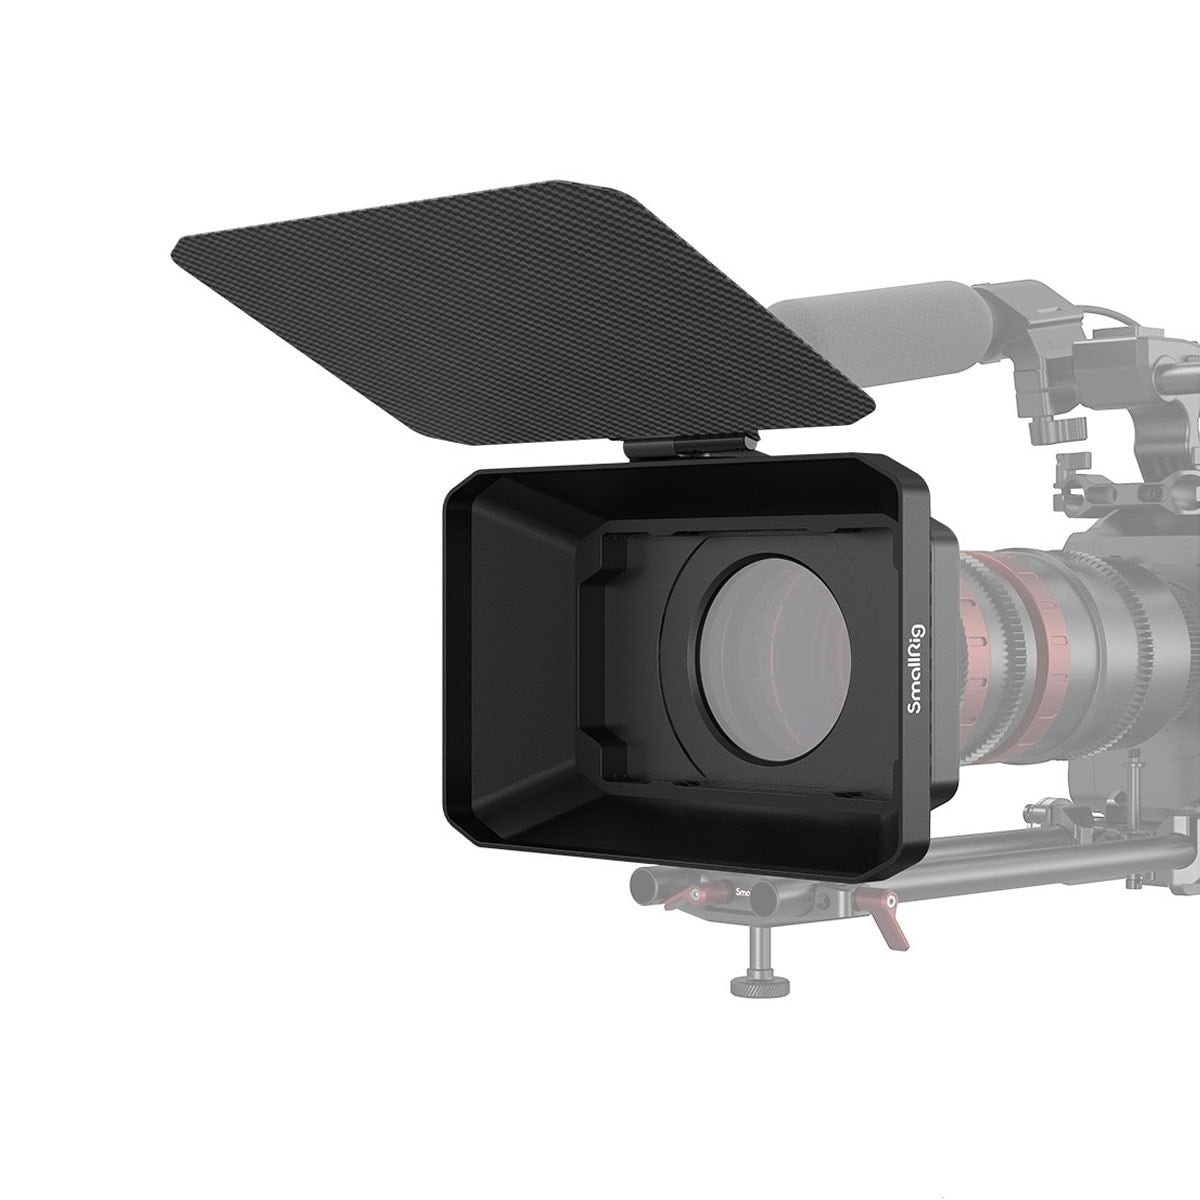 Smallrig Matte box 2660 (4x4" and 4x6") for mount and rails